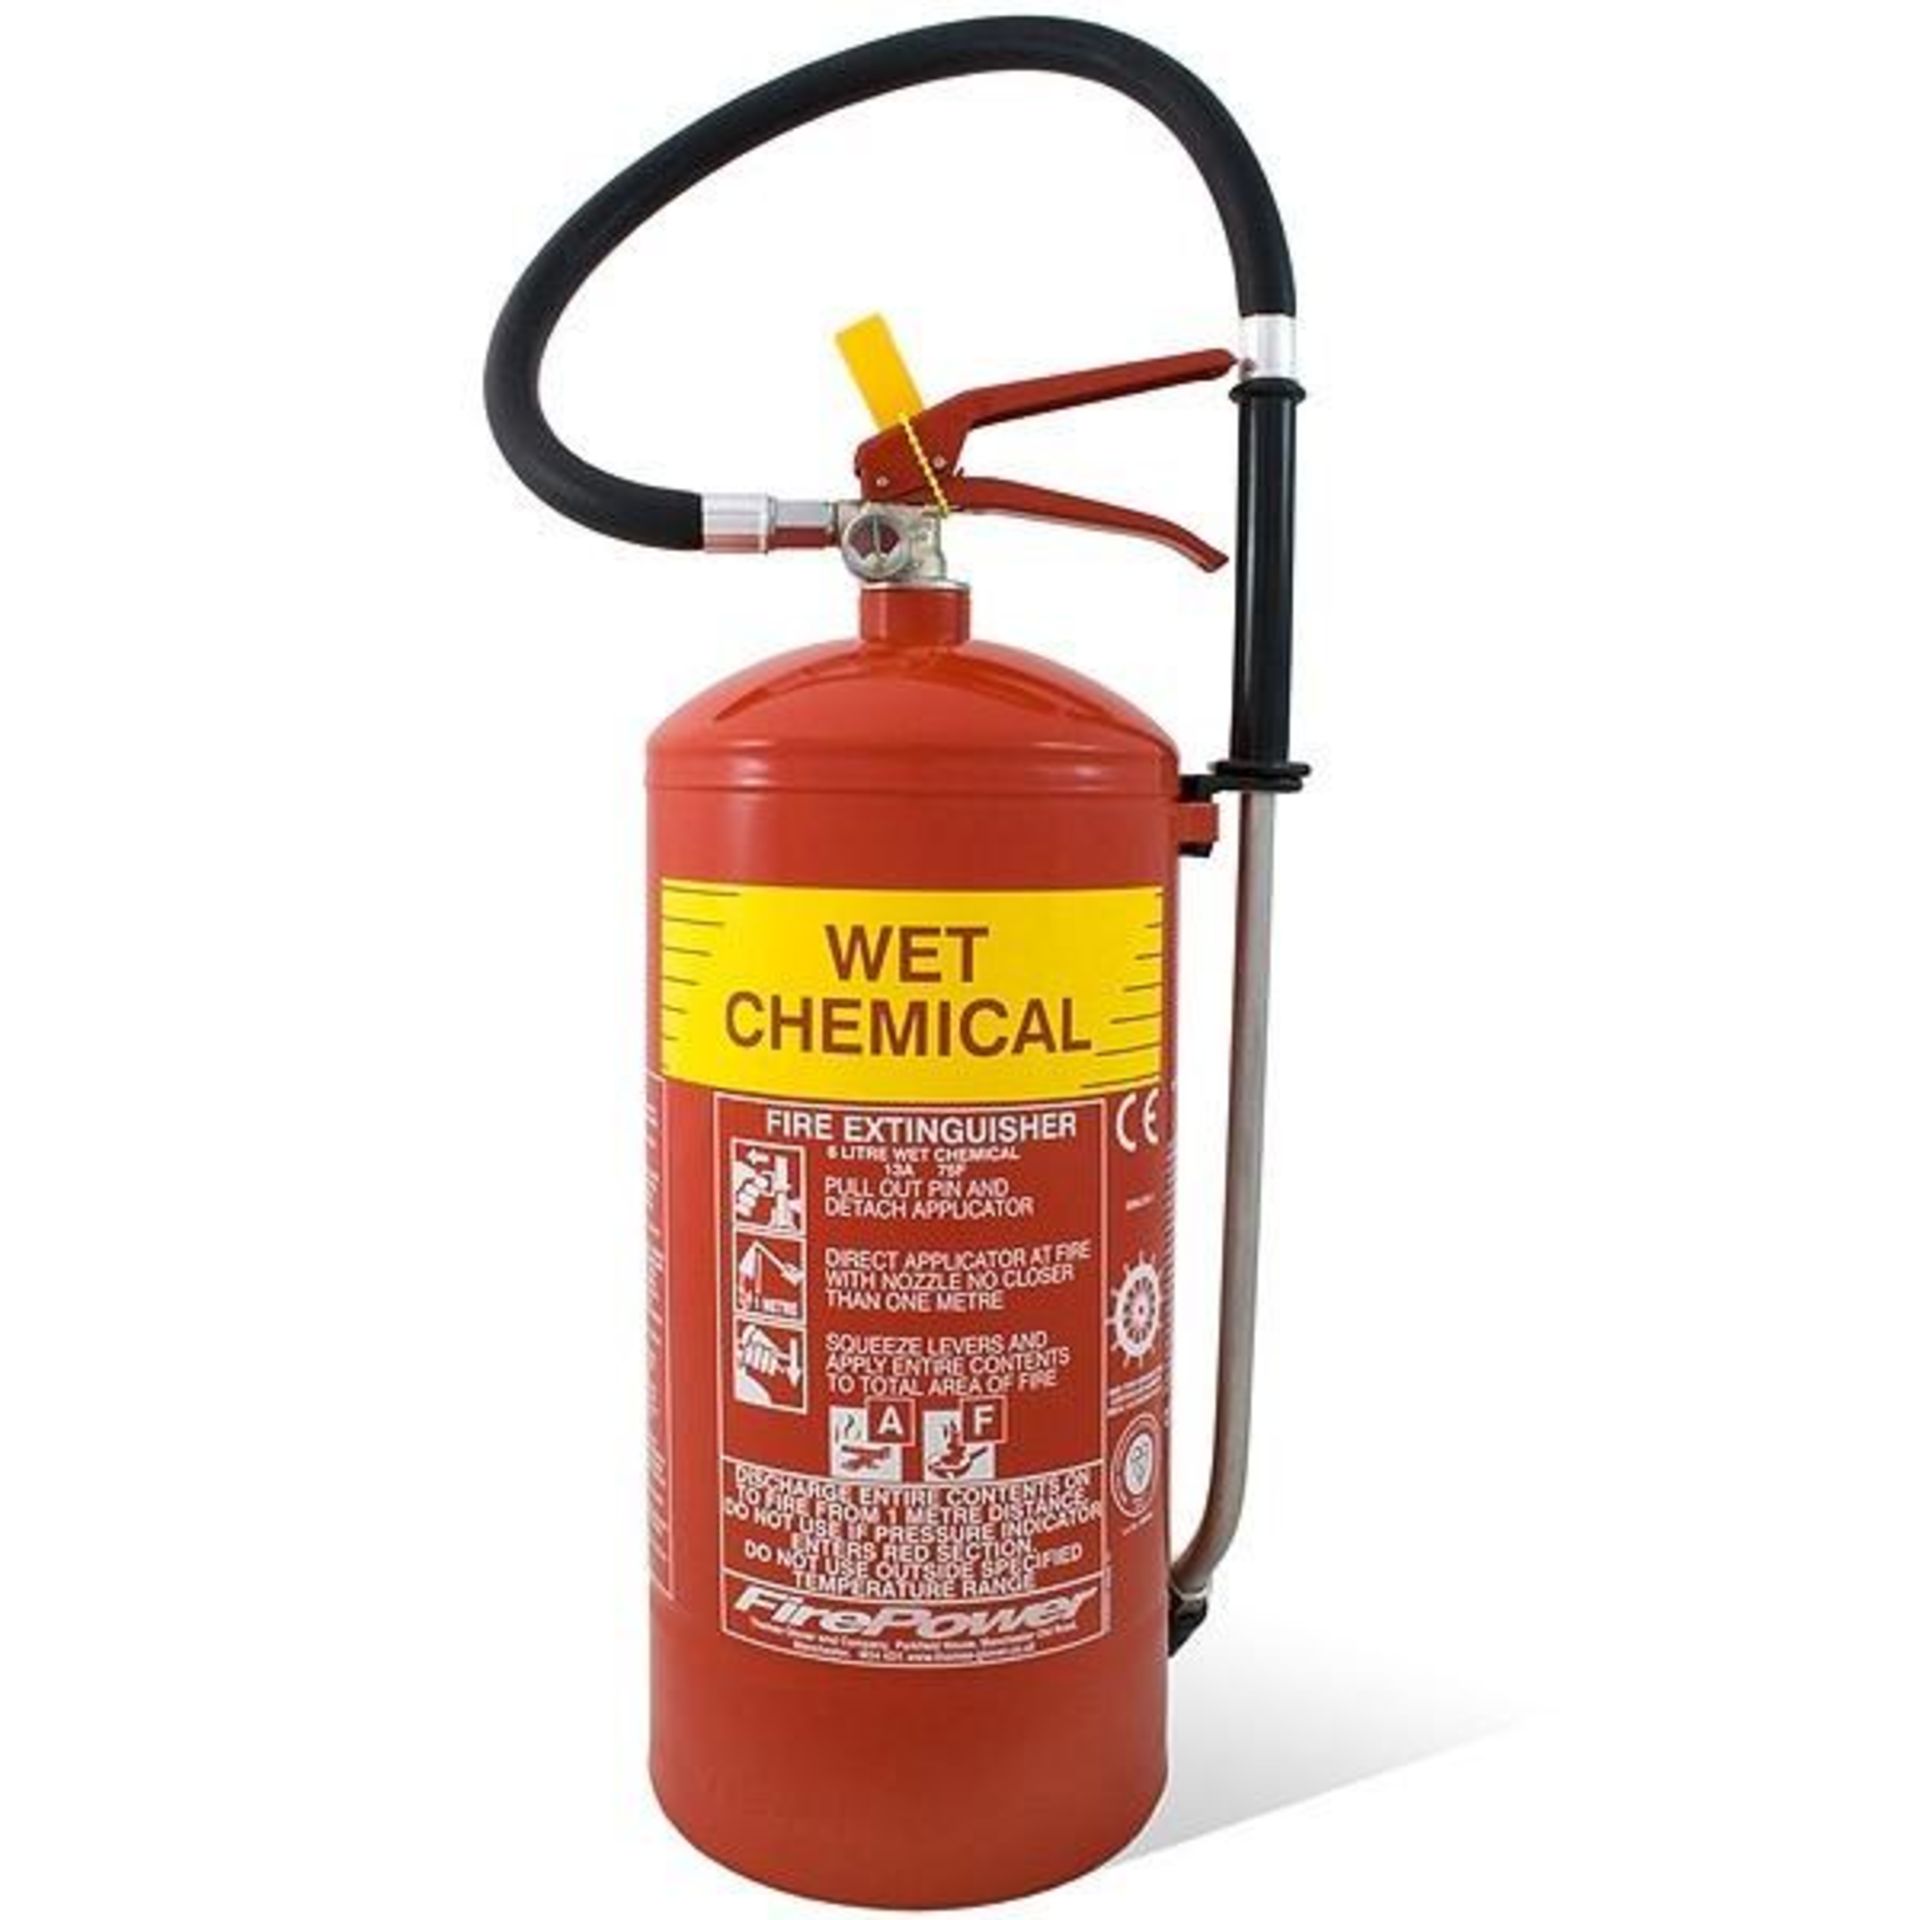 3 x 6 Litre Wet Chemical Fire Extinguishers (F Class) - CL185 - Ref: 57011/P28 - New Stock - Locatio